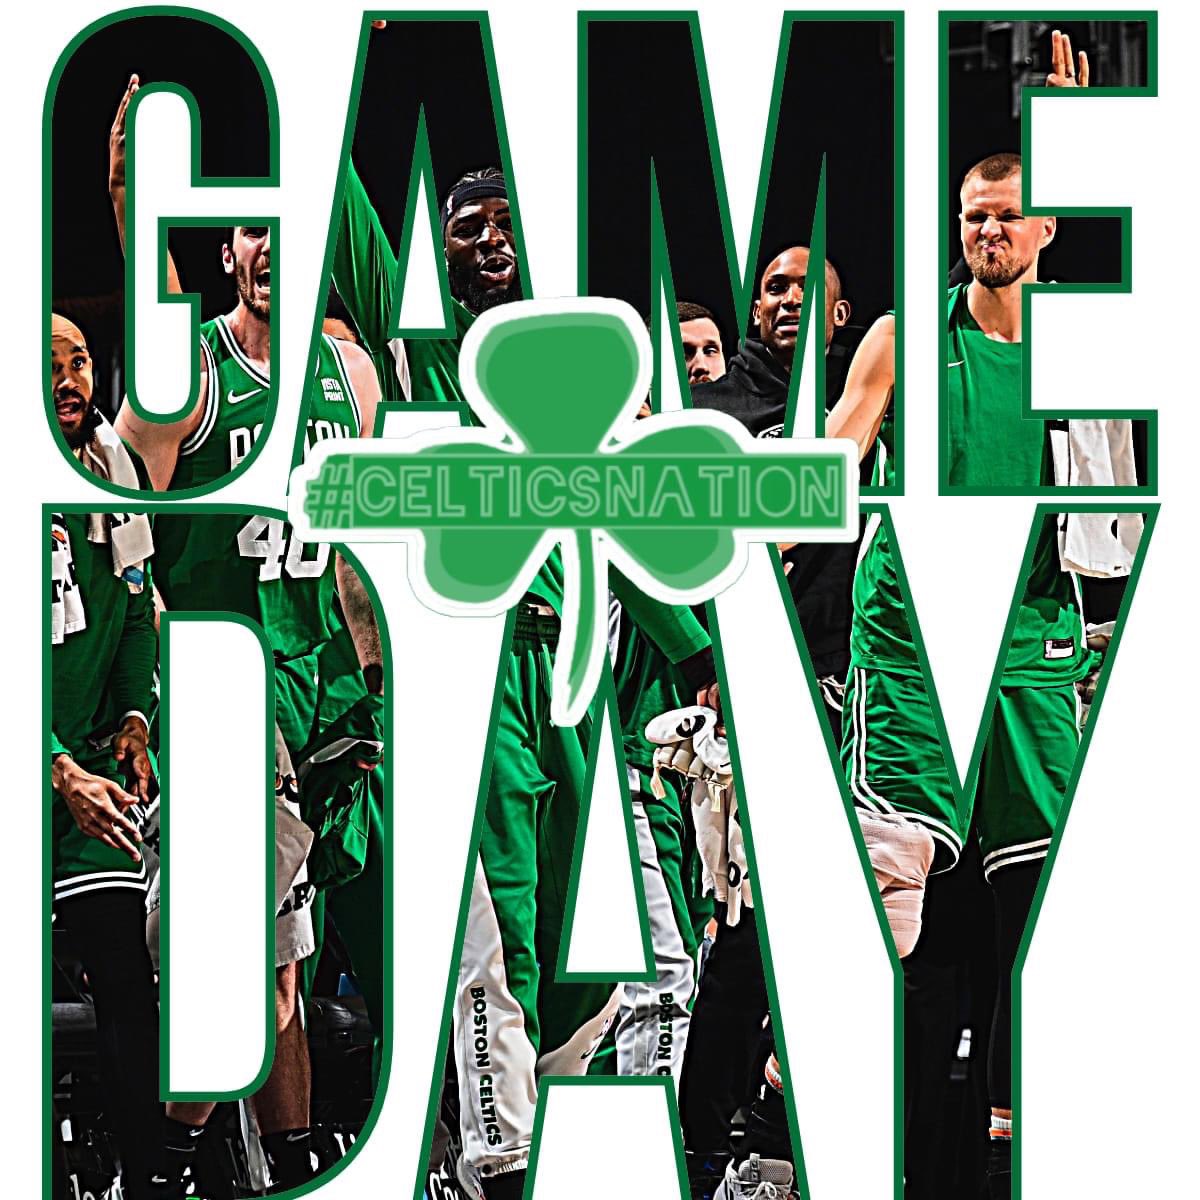 LETS GO BOYS ! It’s Game Day! Time to go 3-1 and win on HOME TURF! Shit these haters up and prove why we’re Up! #DefendCauseway #DifferentHere  #BostonCeltics #BleedGreen